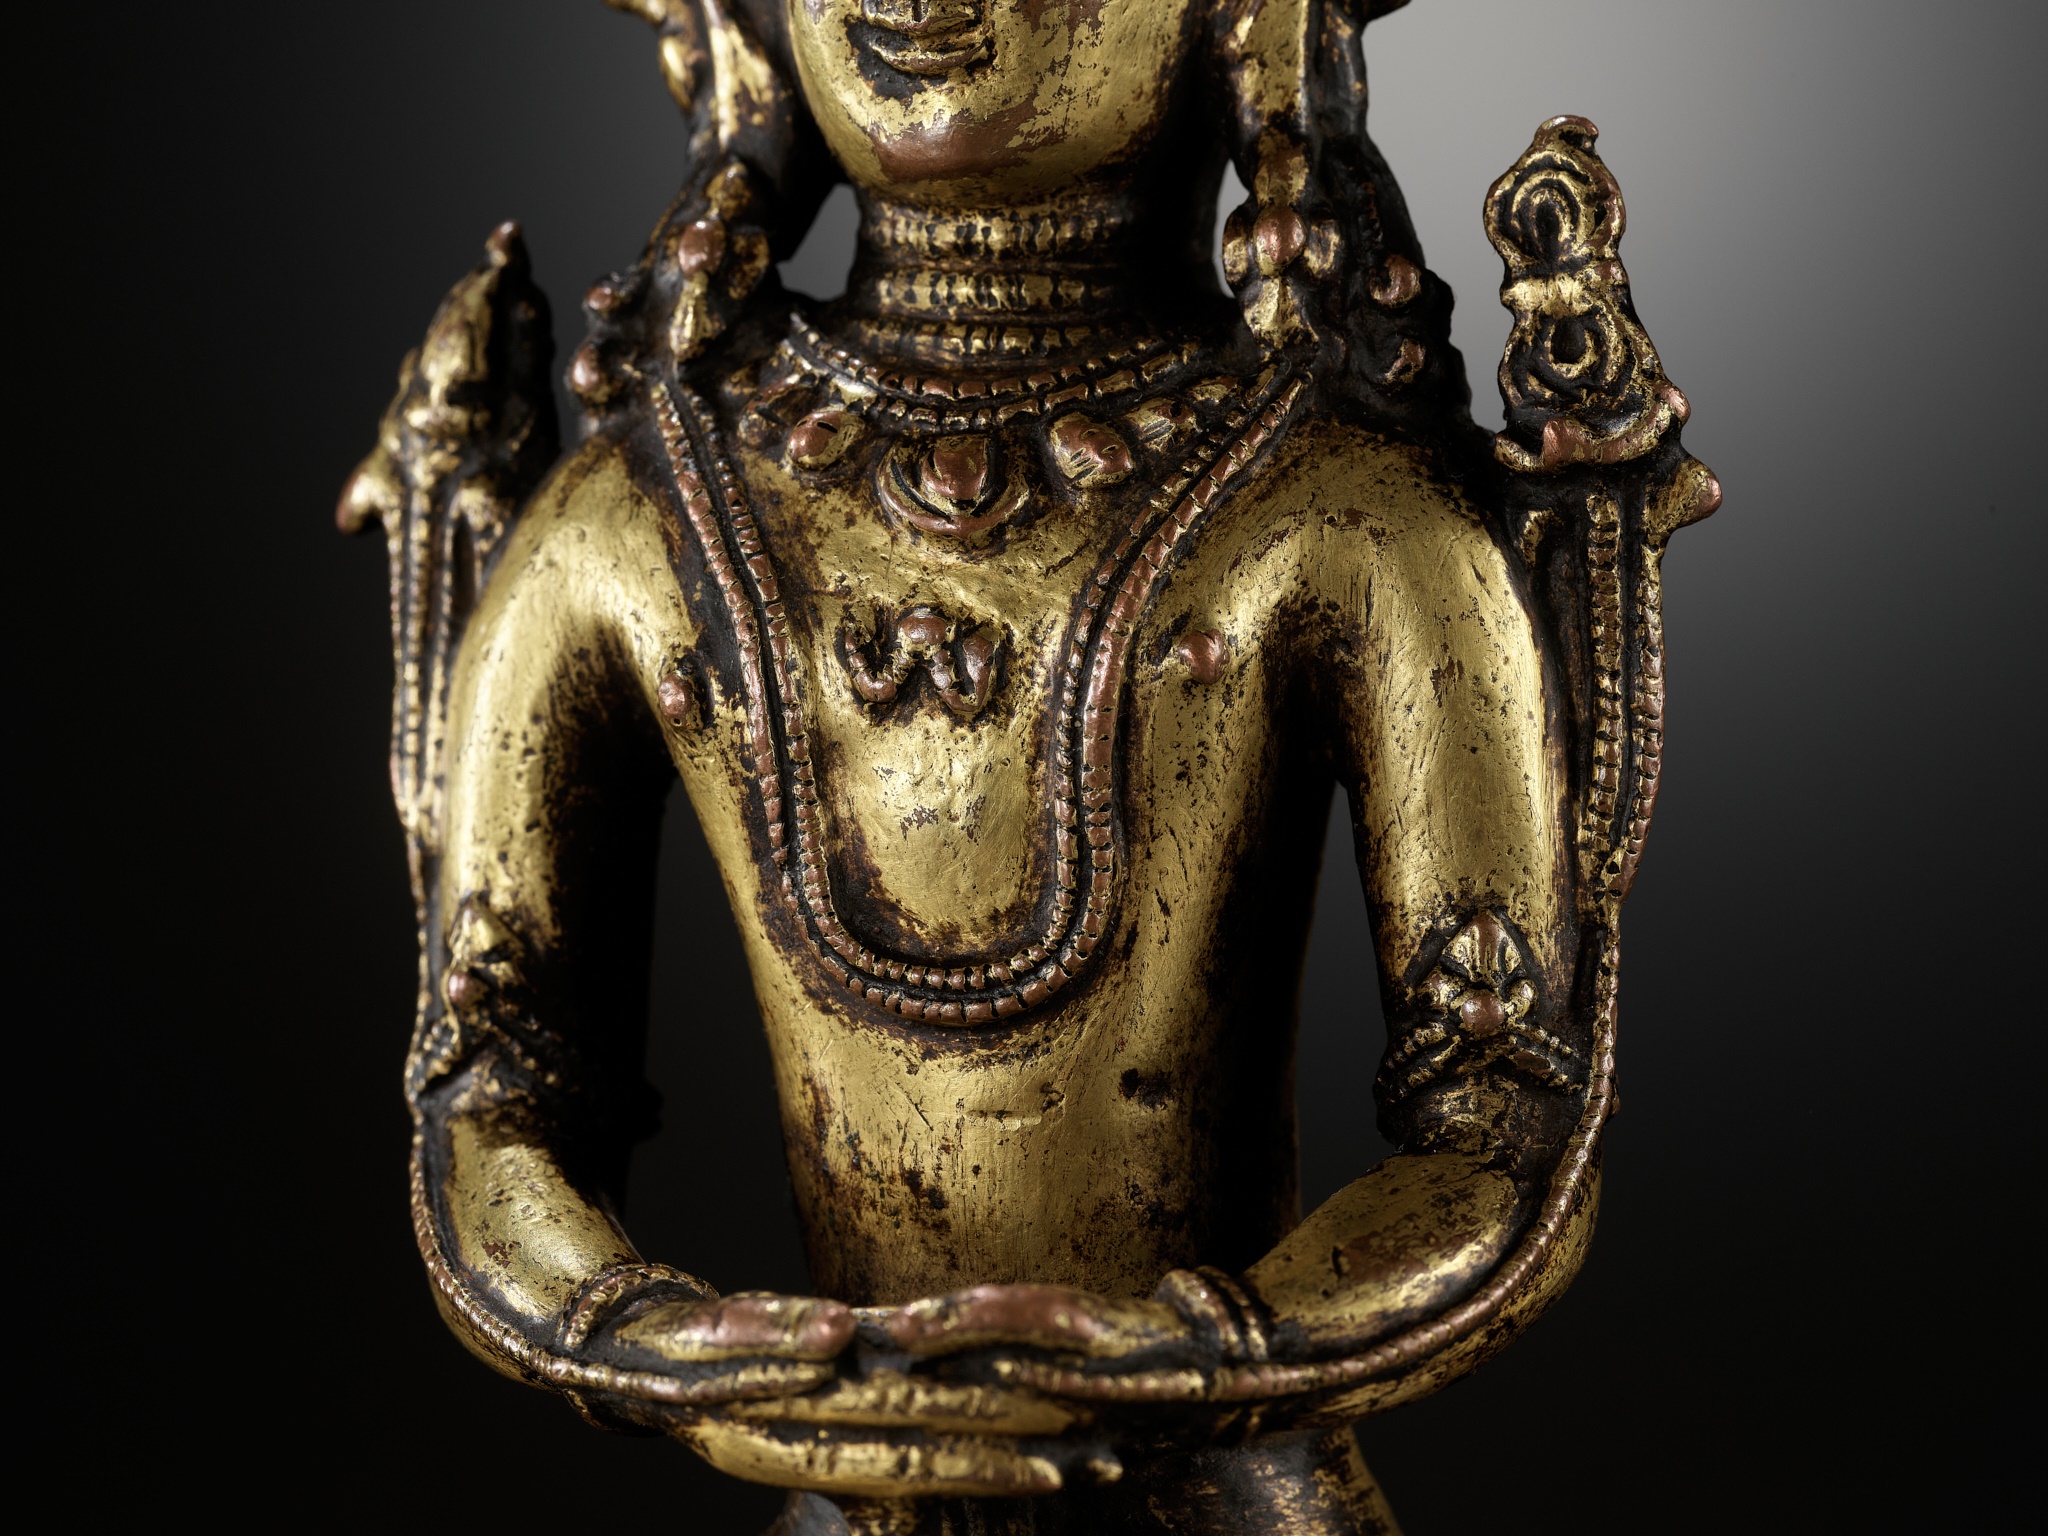 A GILT COPPER-ALLOY FIGURE OF KUNZANG AKOR, BON TRADITION, TIBET, 14TH-15TH CENTURY - Image 2 of 13